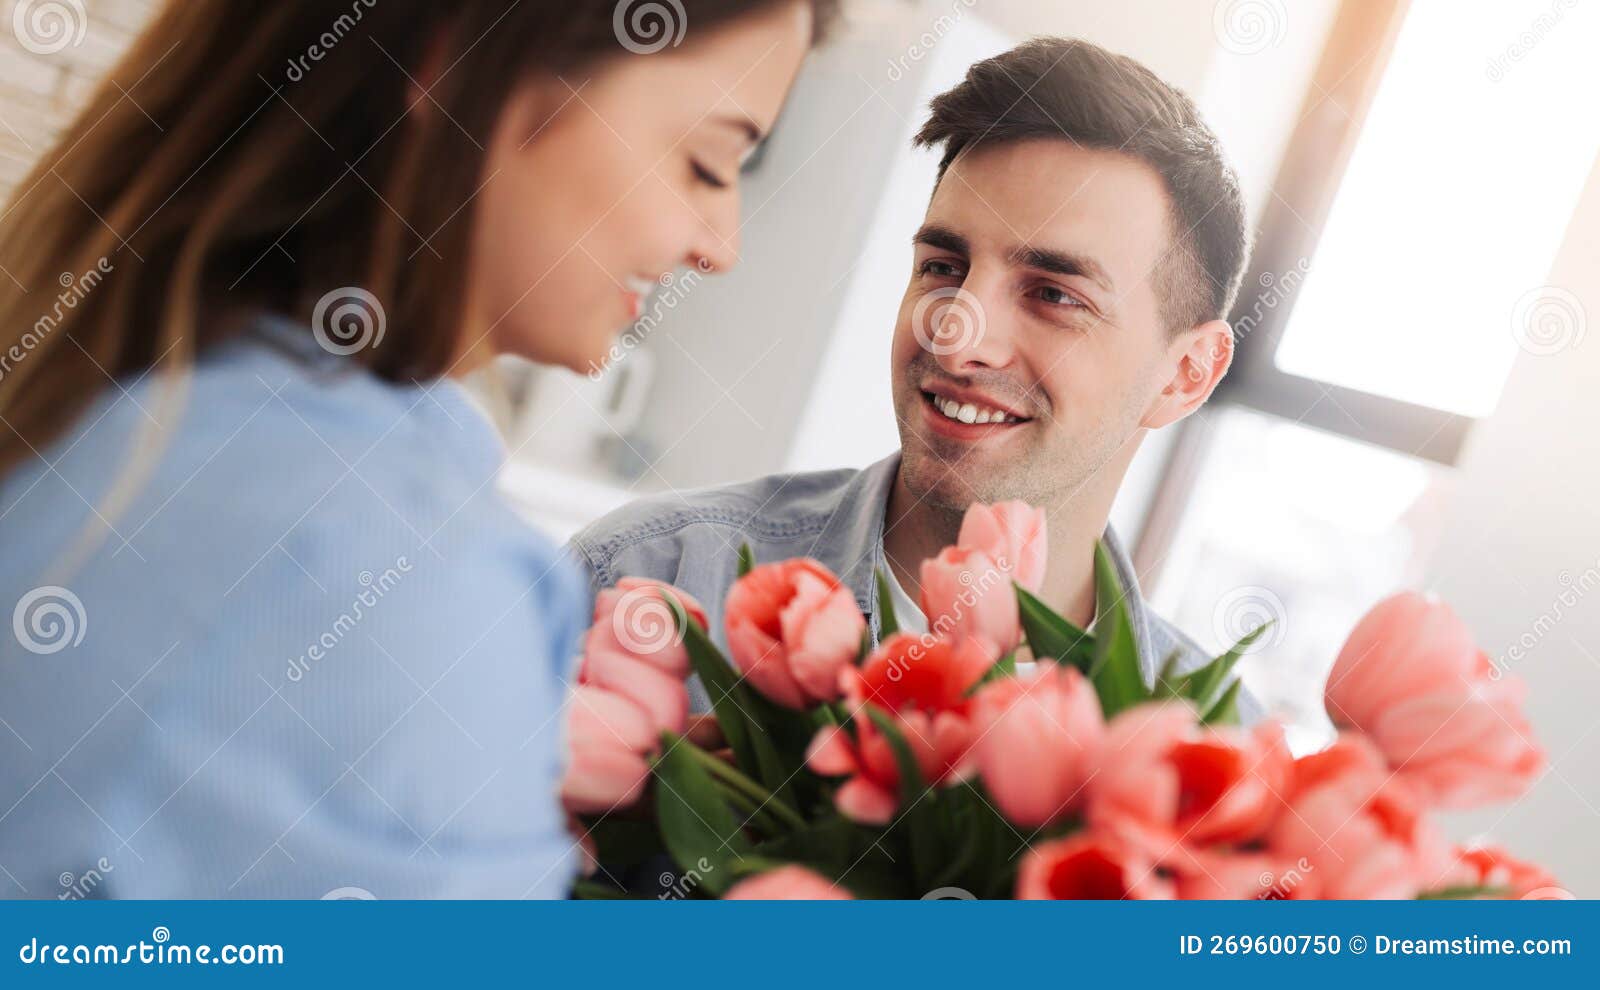 picture showing man giving flowers to a woman at home. romantic concept. woman`s day